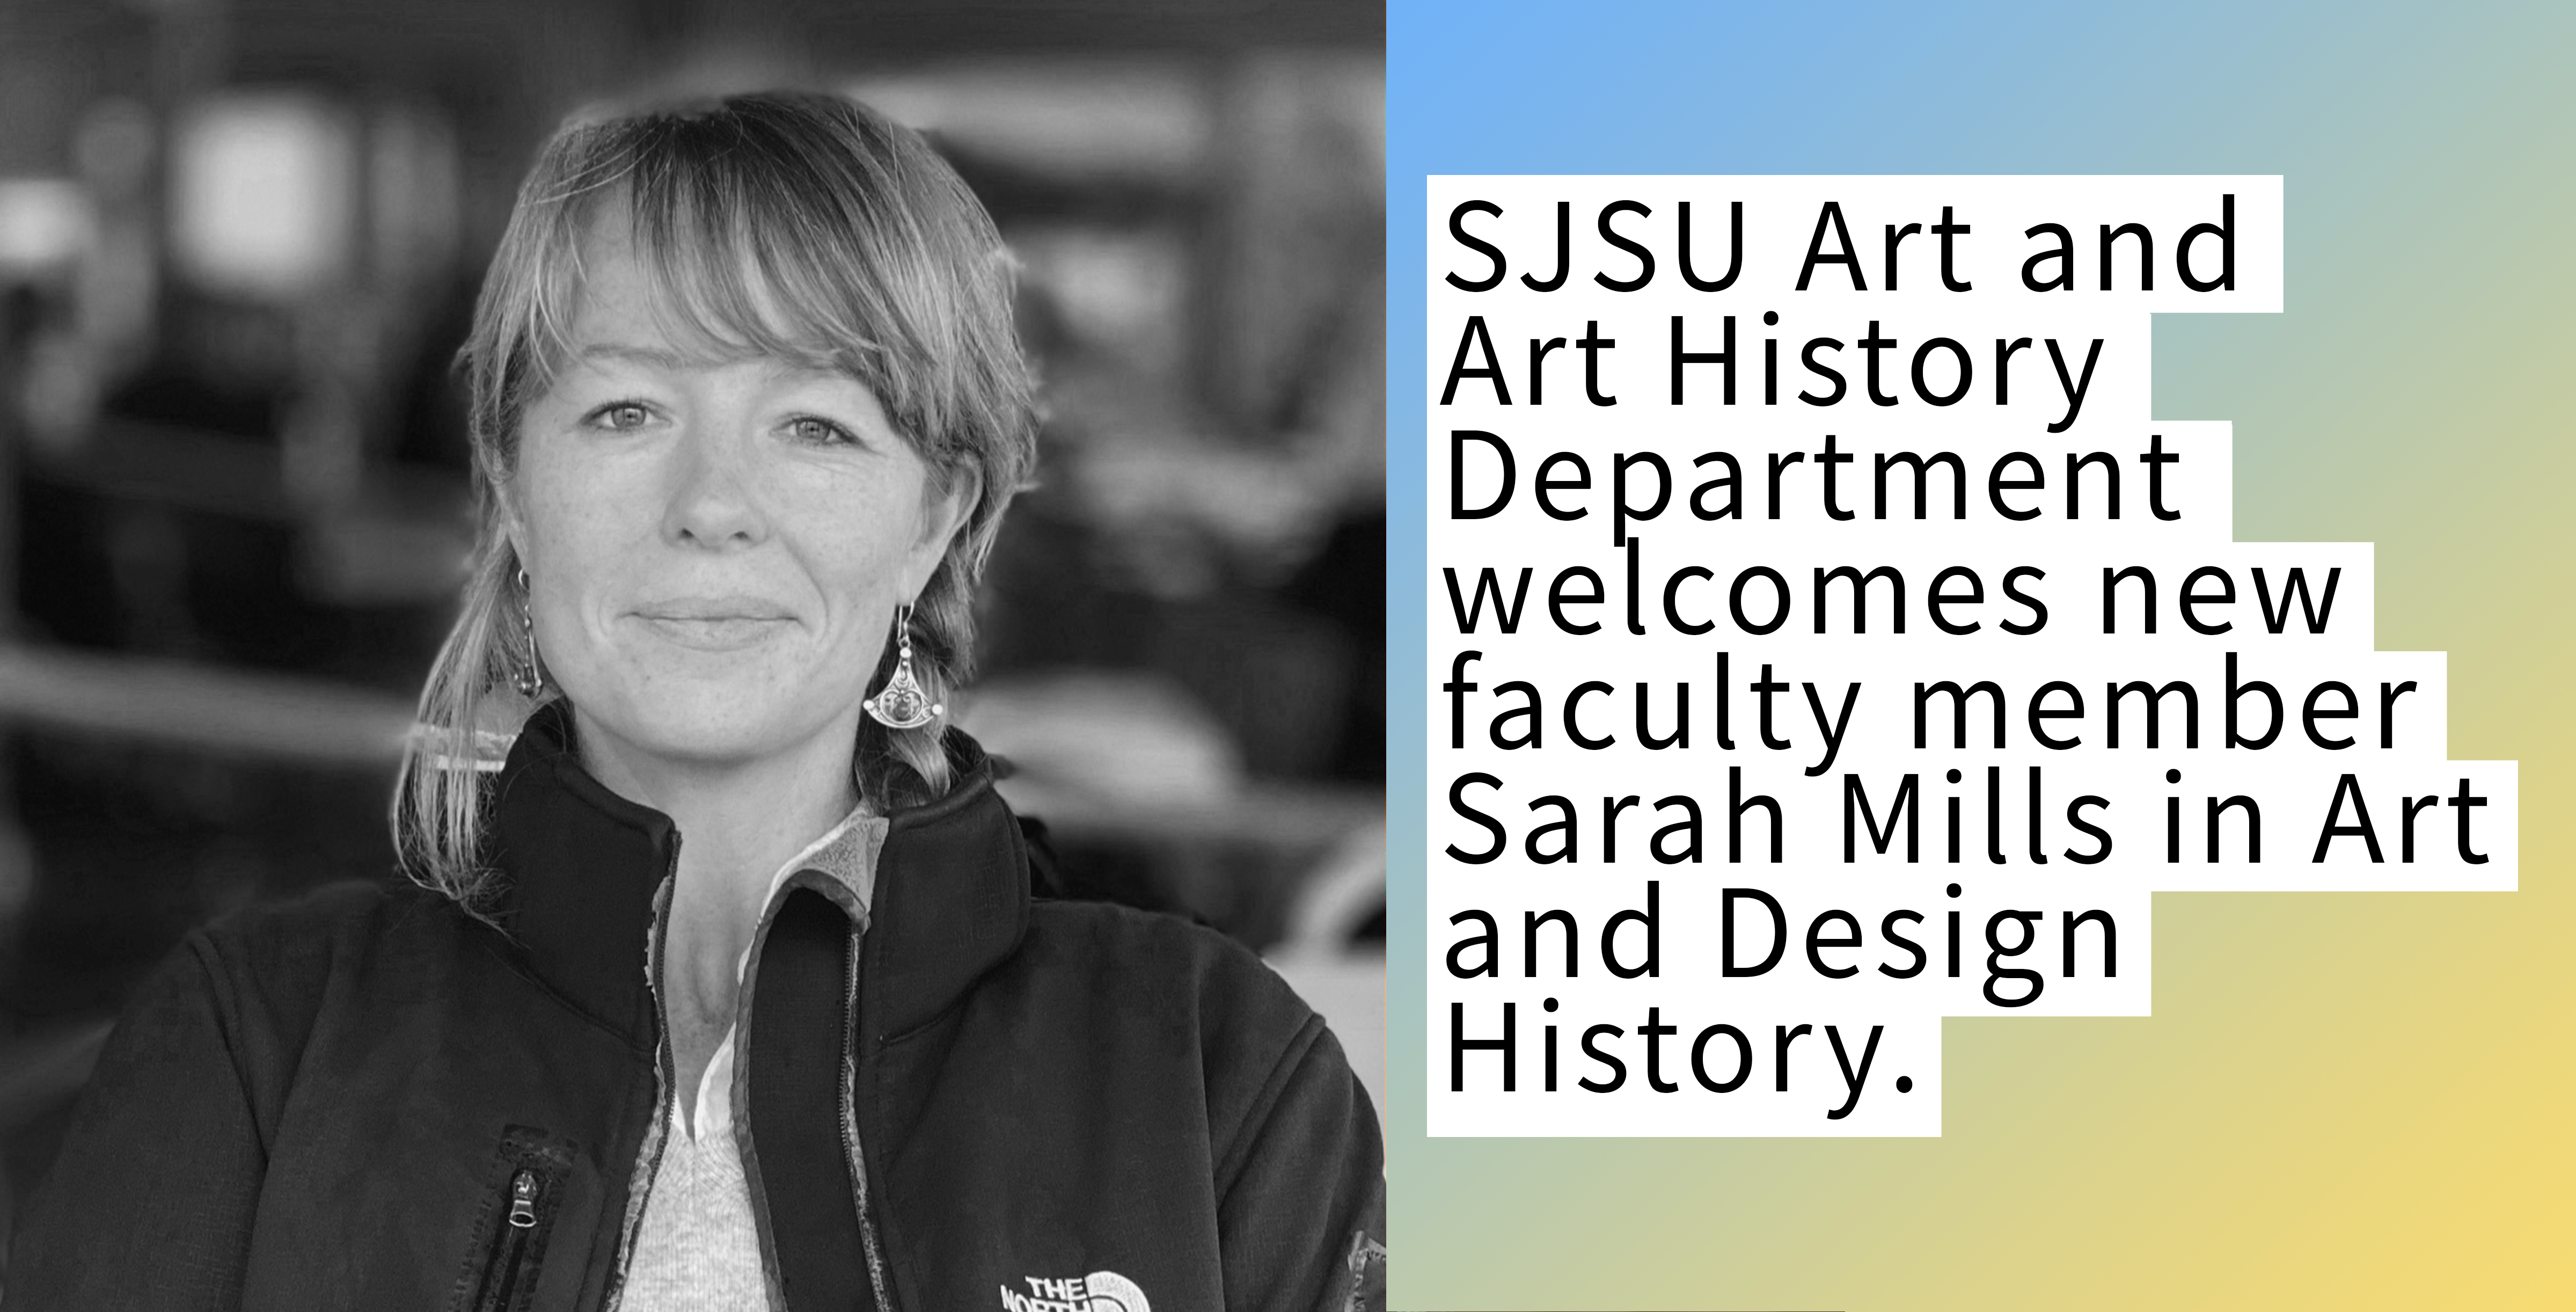 Image description welcoming new faculty Sarah Mills to the Art and Art History Department